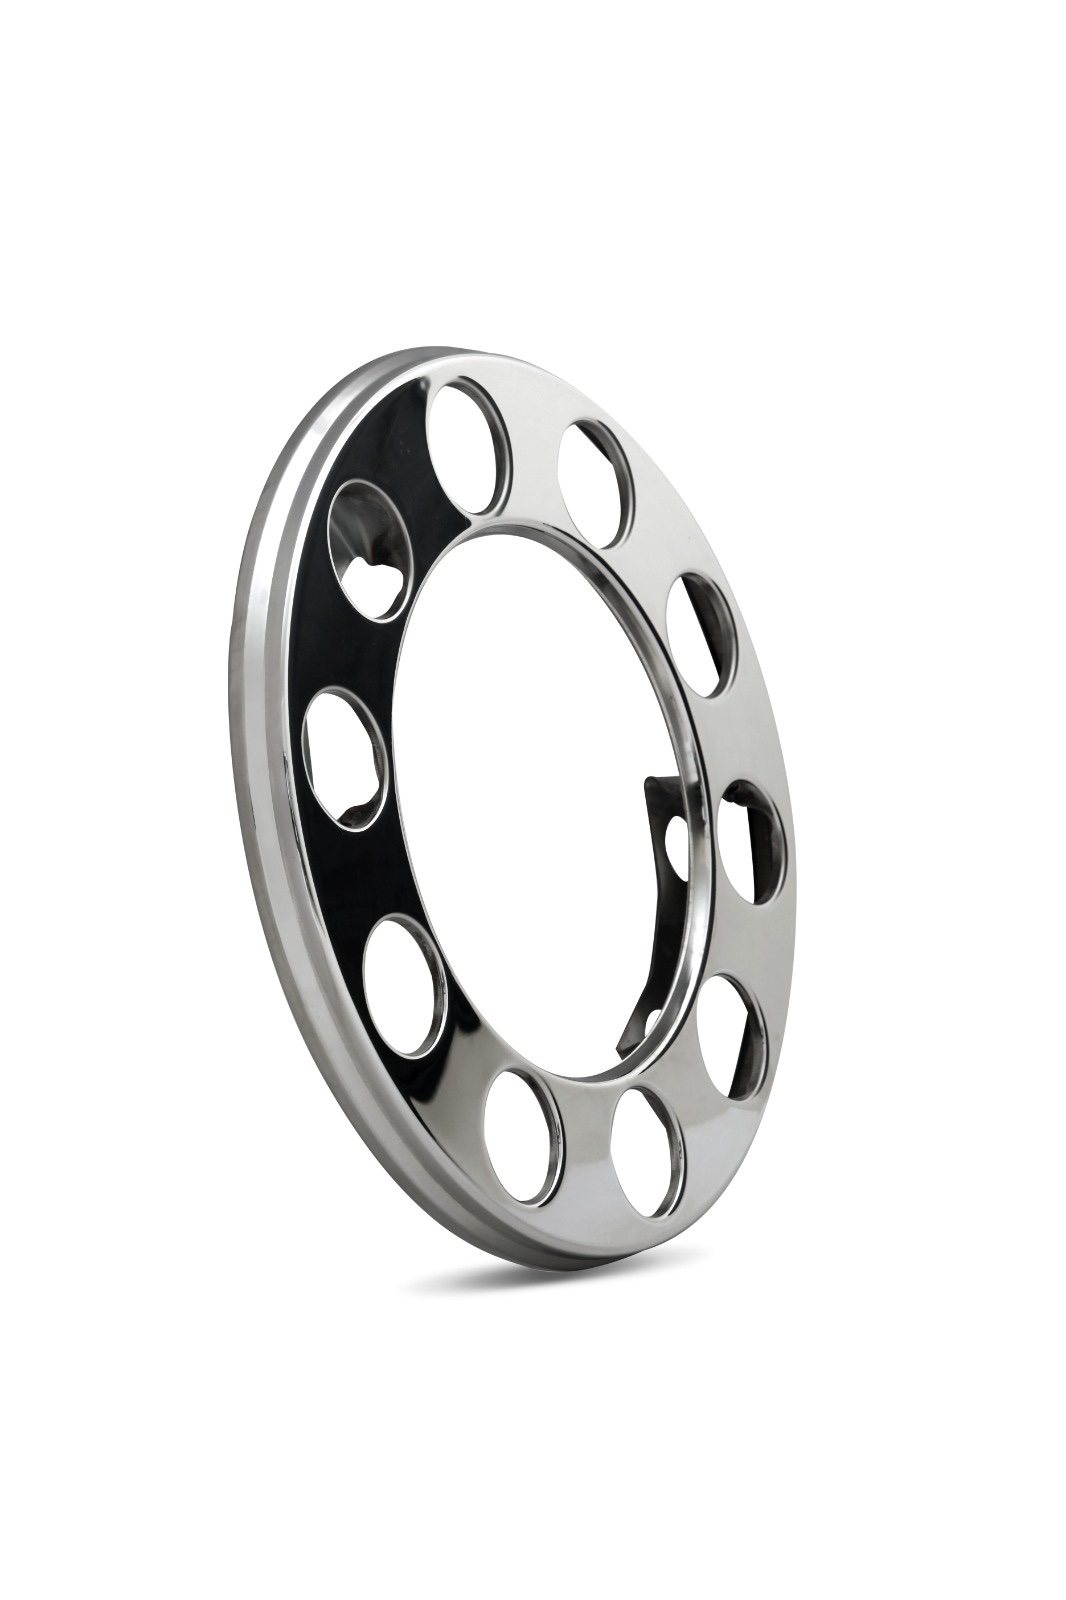 22,5 Stainless Steel Wheel Covers  (10 STUDS) (HOLLOW),Code: C1010/7